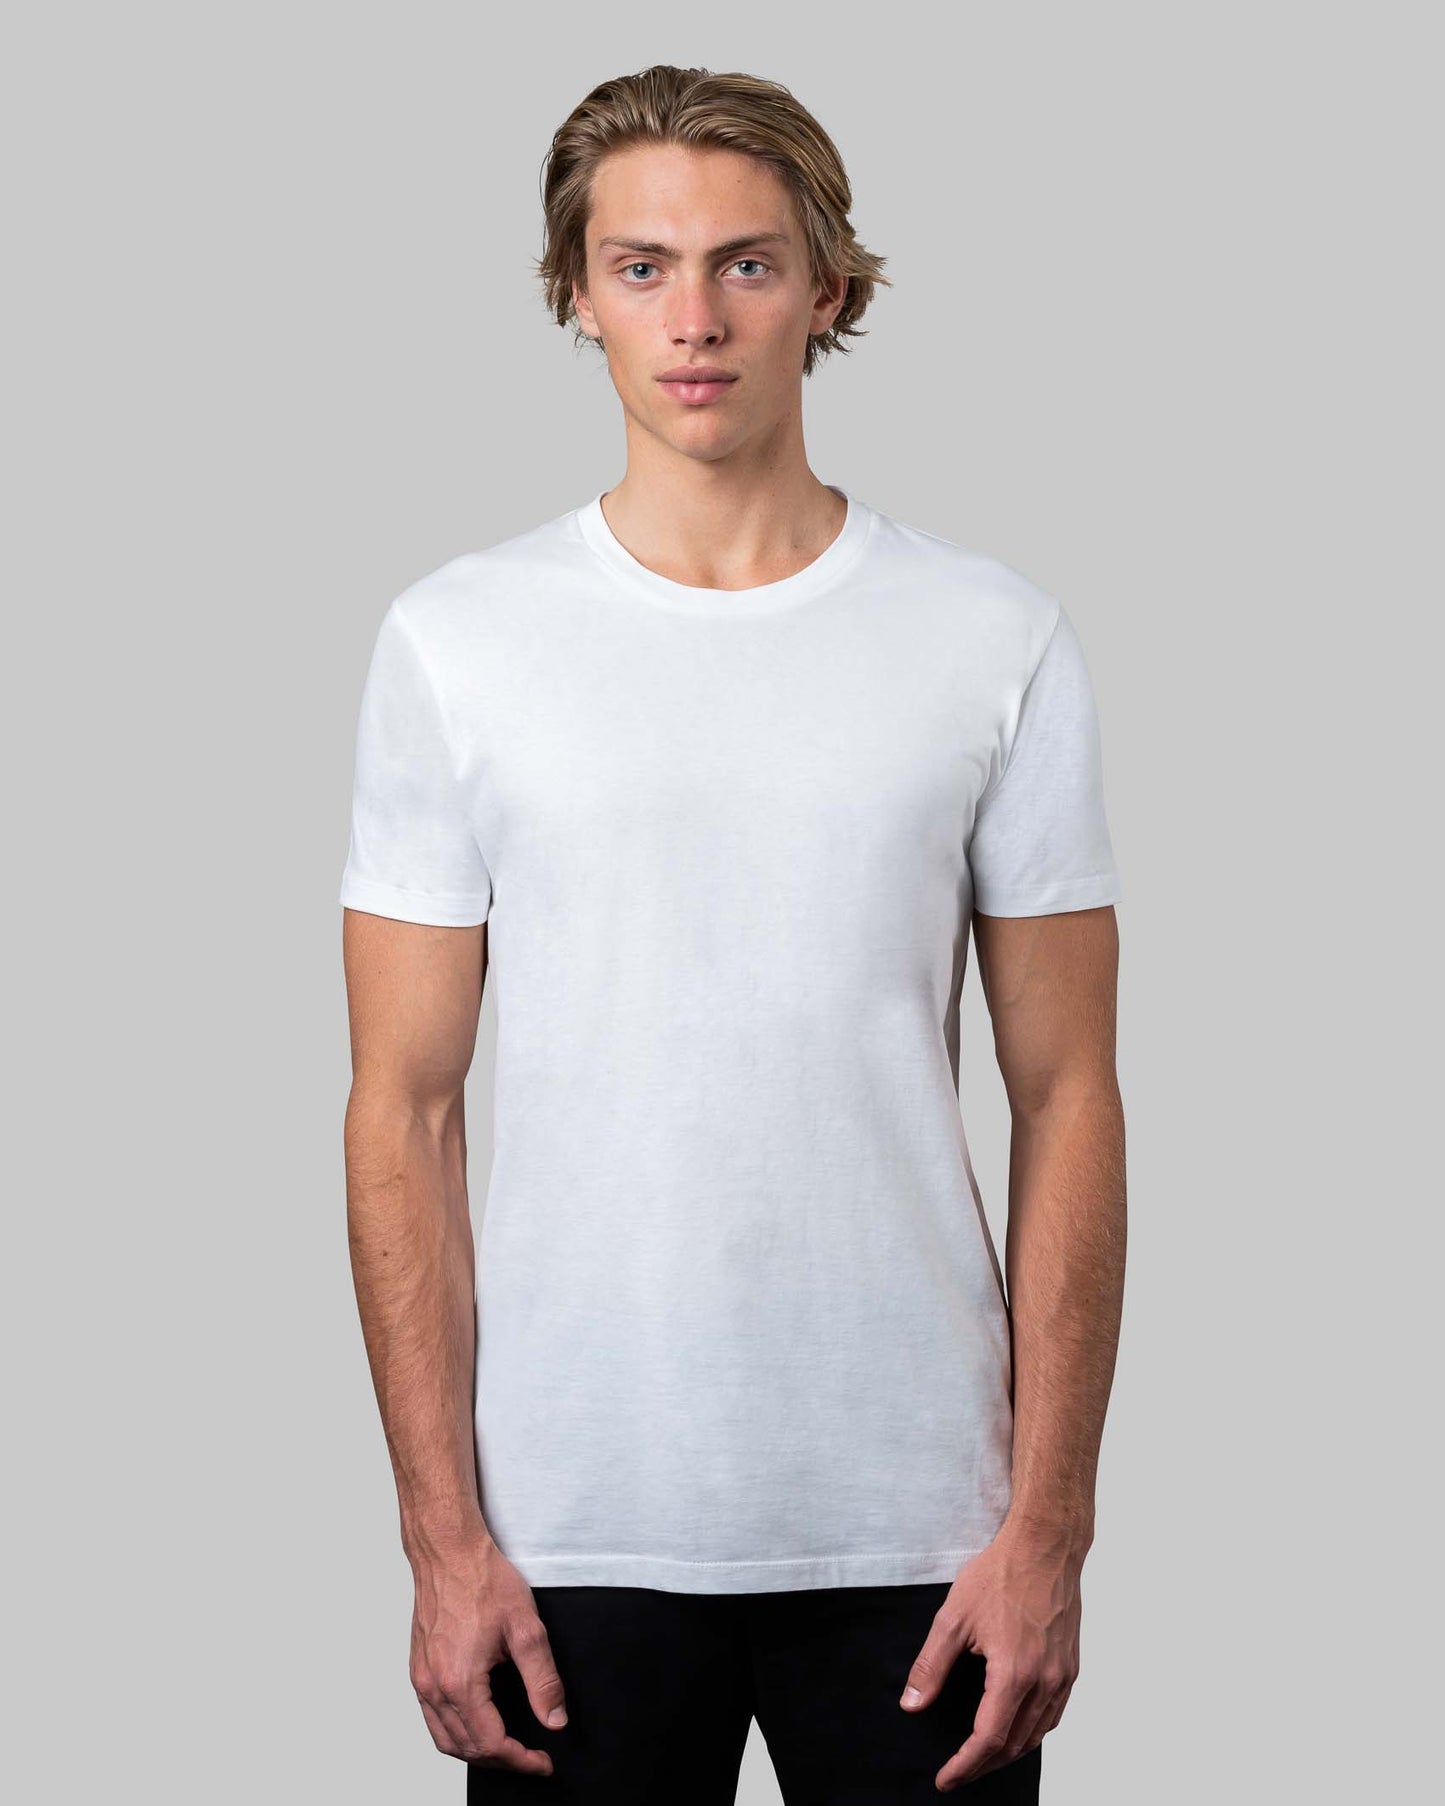 Mens Slim Fit T-shirt x package of 10